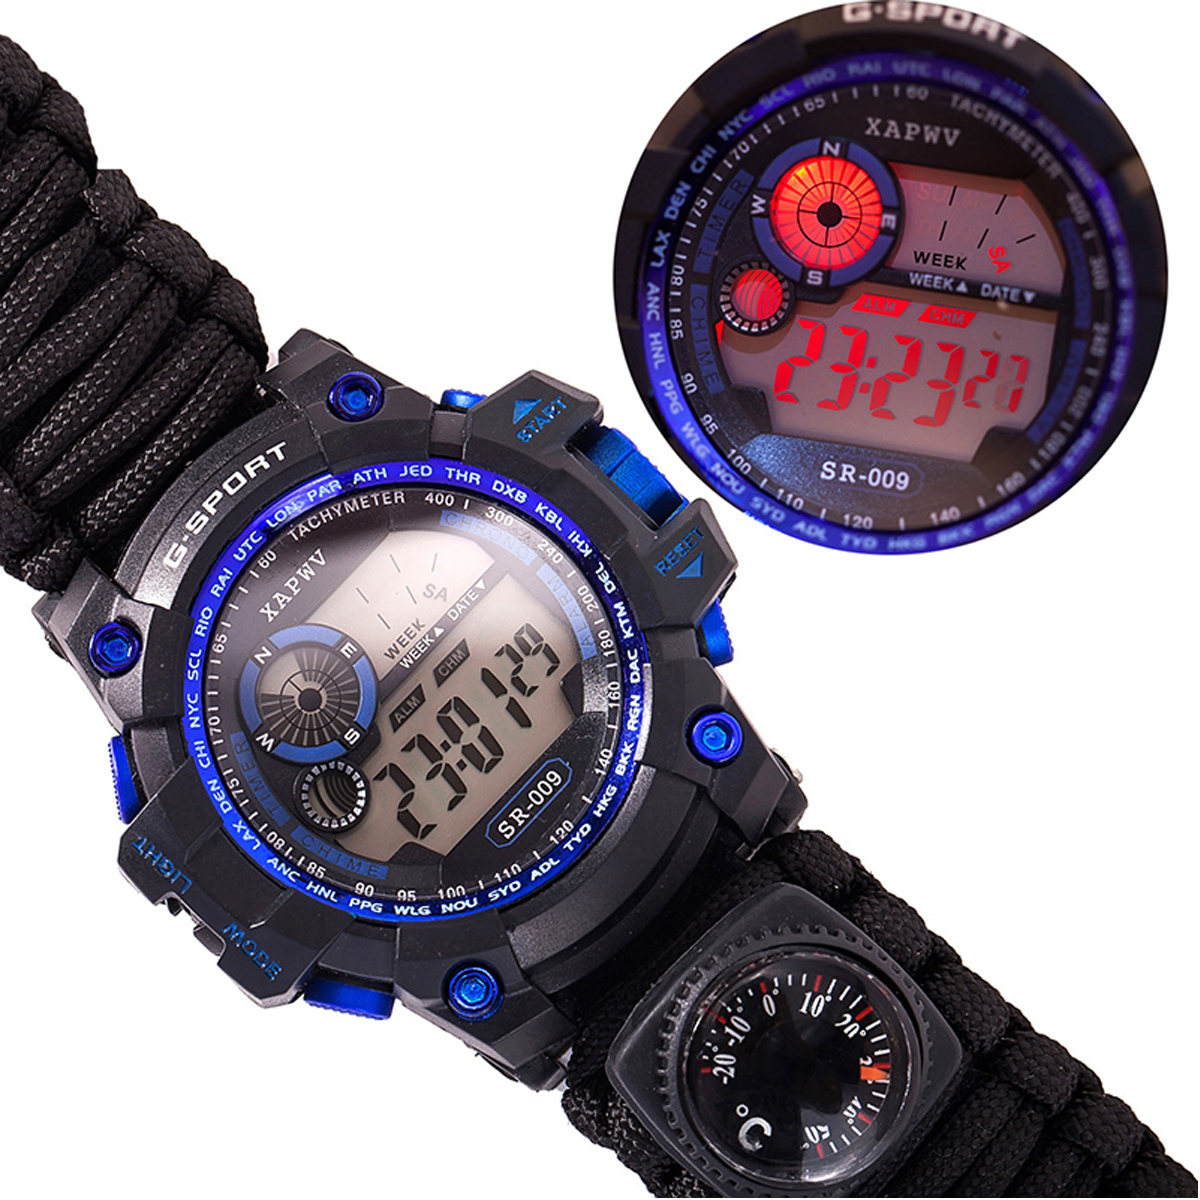 

7 In 1 Survival Watch Camping Multifunctional Compass Date Alarm Paracord Bracelet LED Backlight Gadget EDC Tool